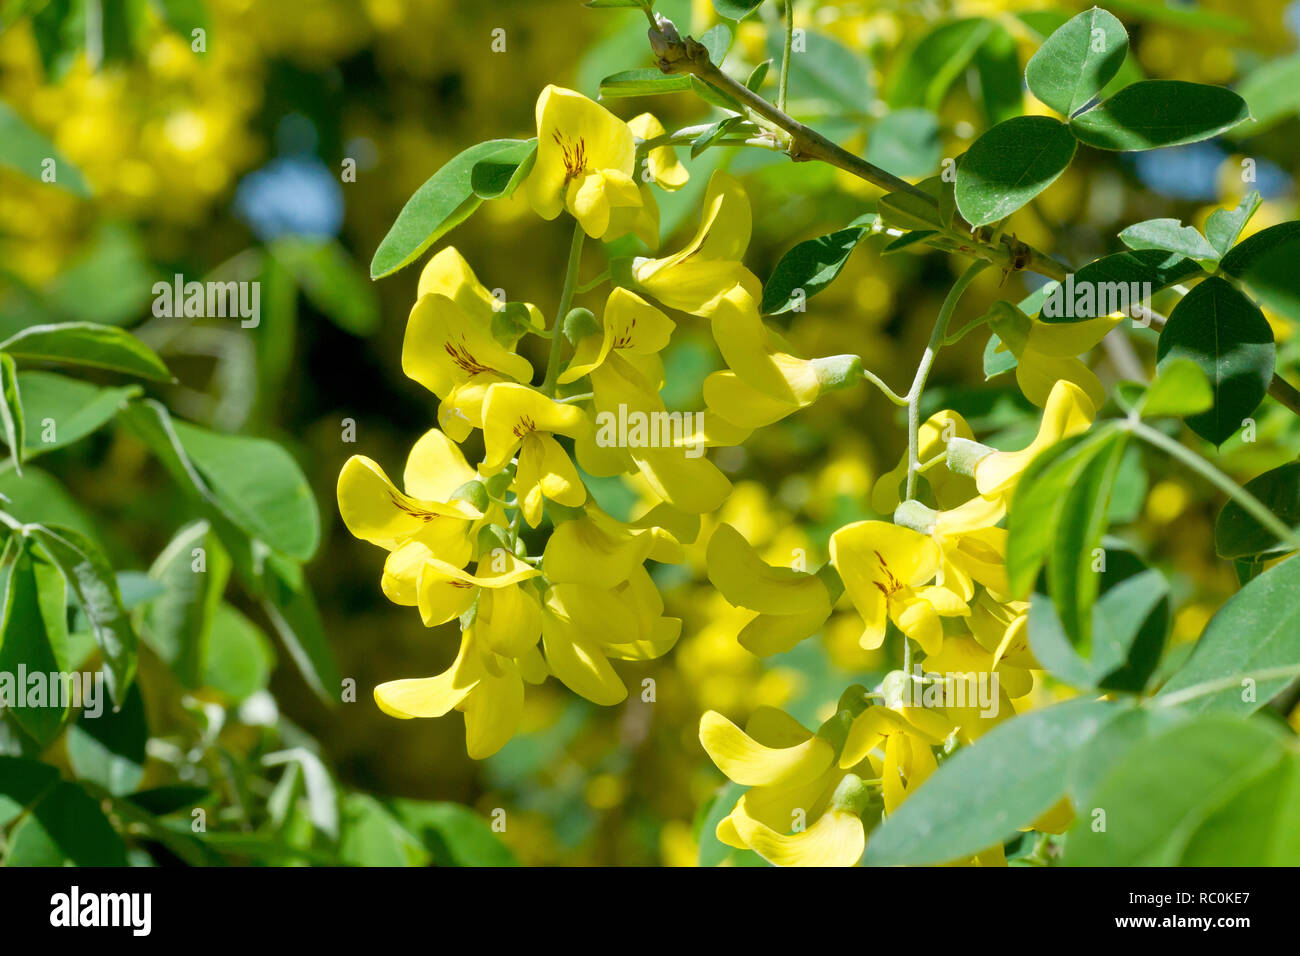 Laburnum (laburnum anagyroides), a close up of the flowers and leaves. Stock Photo